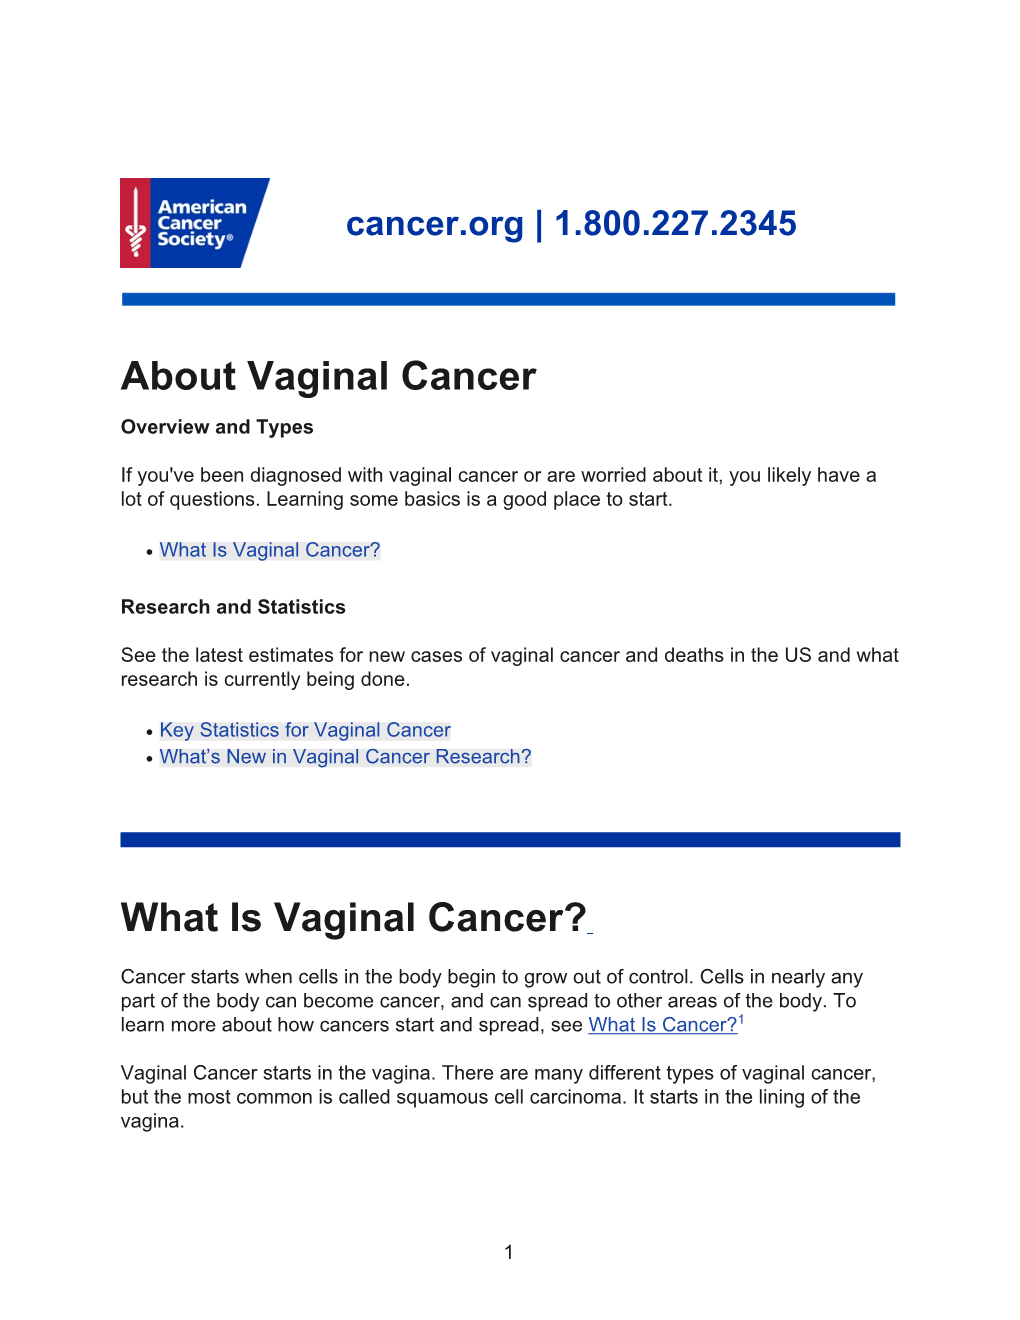 What Is Vaginal Cancer?